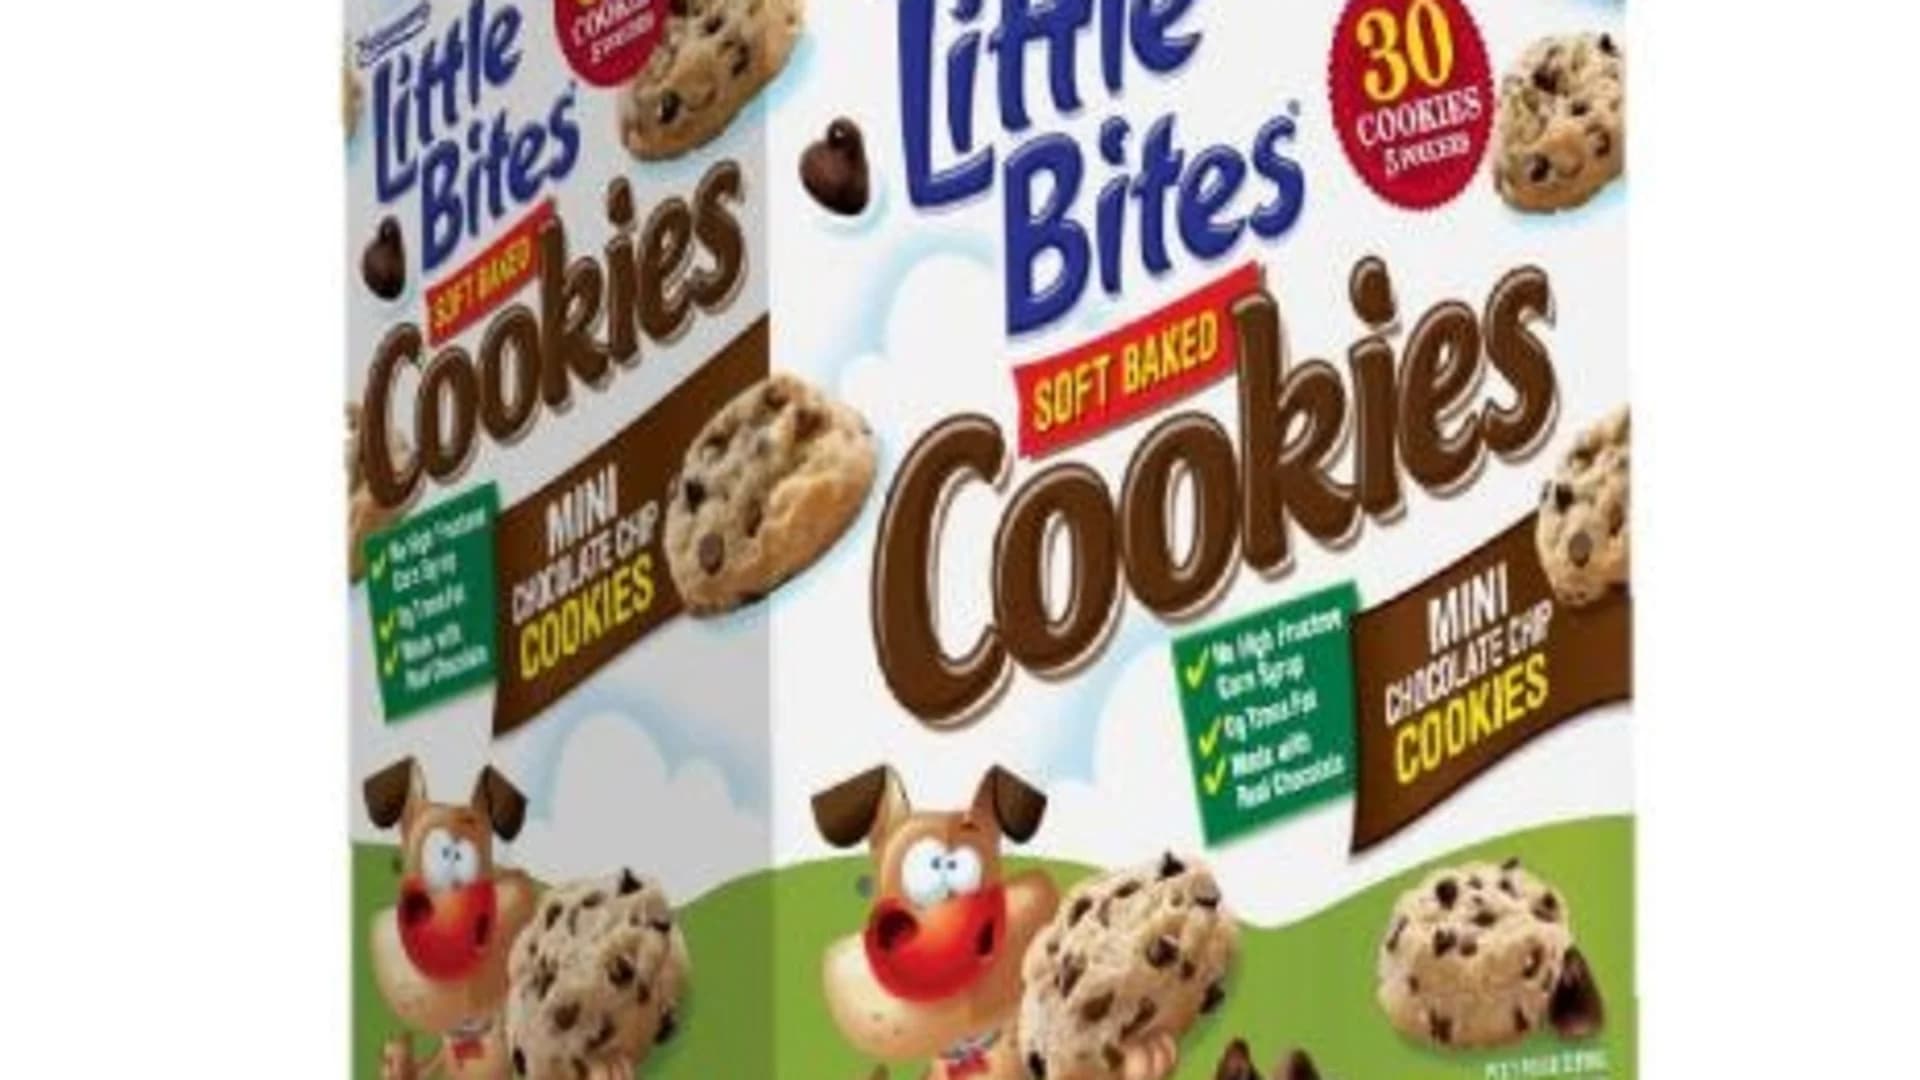 FDA: Entenmann's Little Bites Chocolate Chip Cookies recalled due to presence of plastic